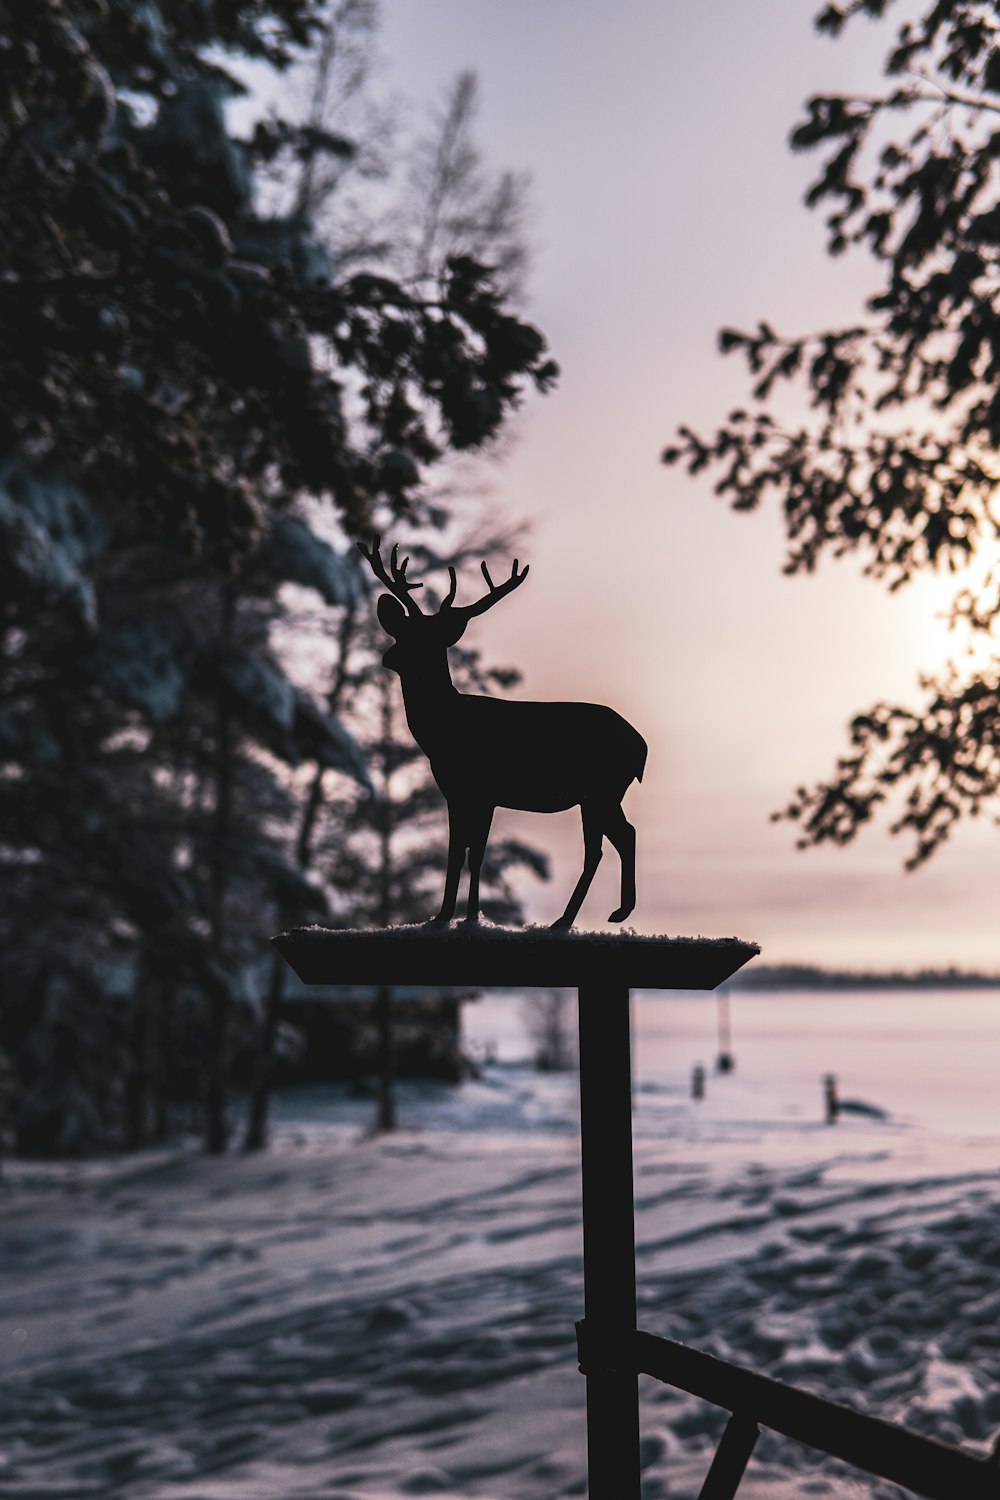 deer standing on blue wooden stand near body of water during daytime